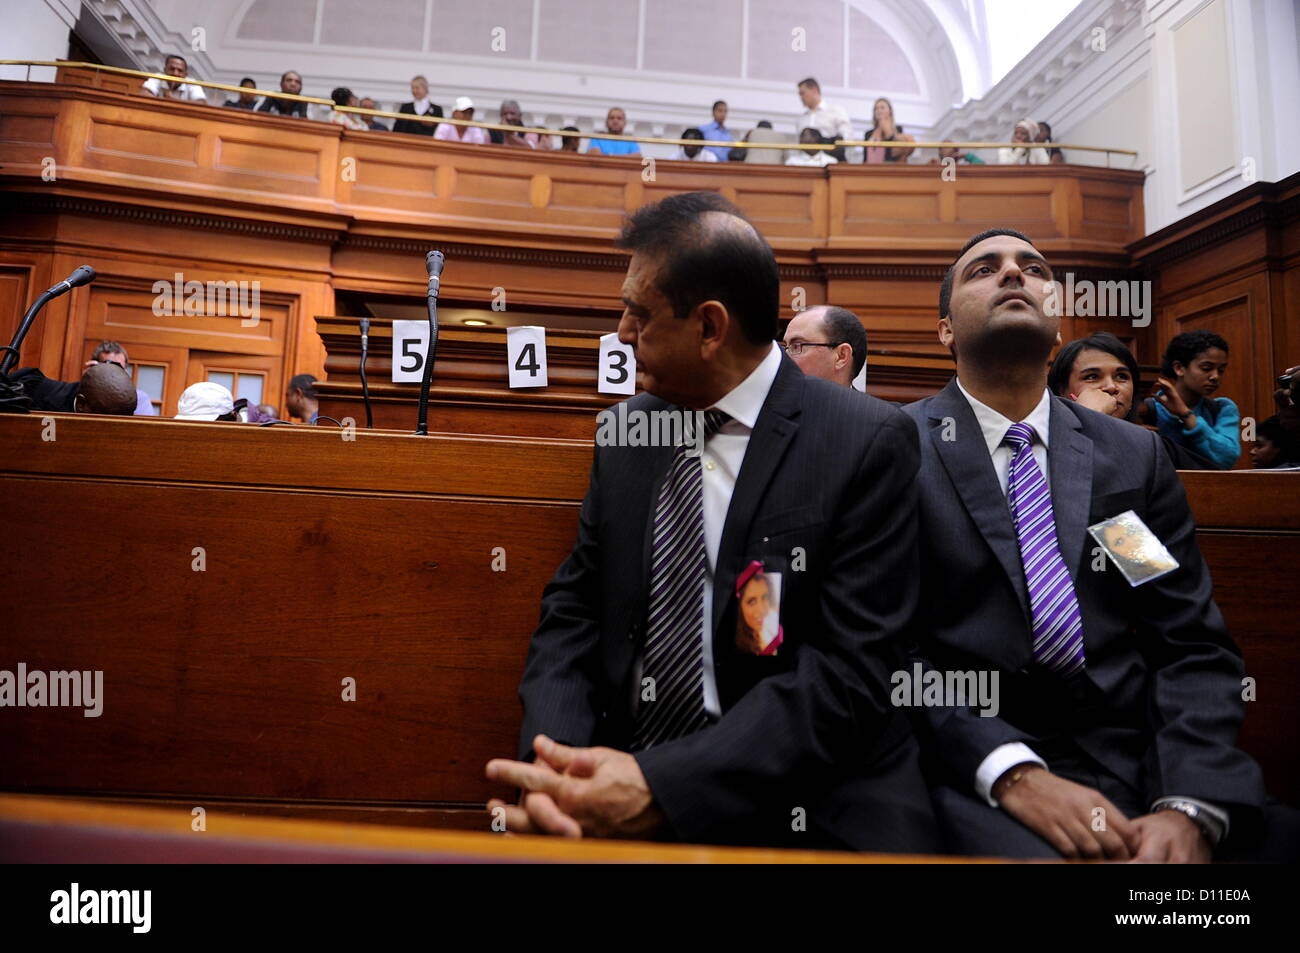 CAPE TOWN, SOUTH AFRICA: Vinod Hindocha, father of murdered Anni Dewani at the Cape Town High Cour at the Cape Town High Court on December 5, 2012  in Cape Town, South Africa. Xolile Mngeni was sentenced to life in prison for the murder of Anni Dewani. (Photo by Gallo Images / Foto24 / Lulama Zenzile) Stock Photo